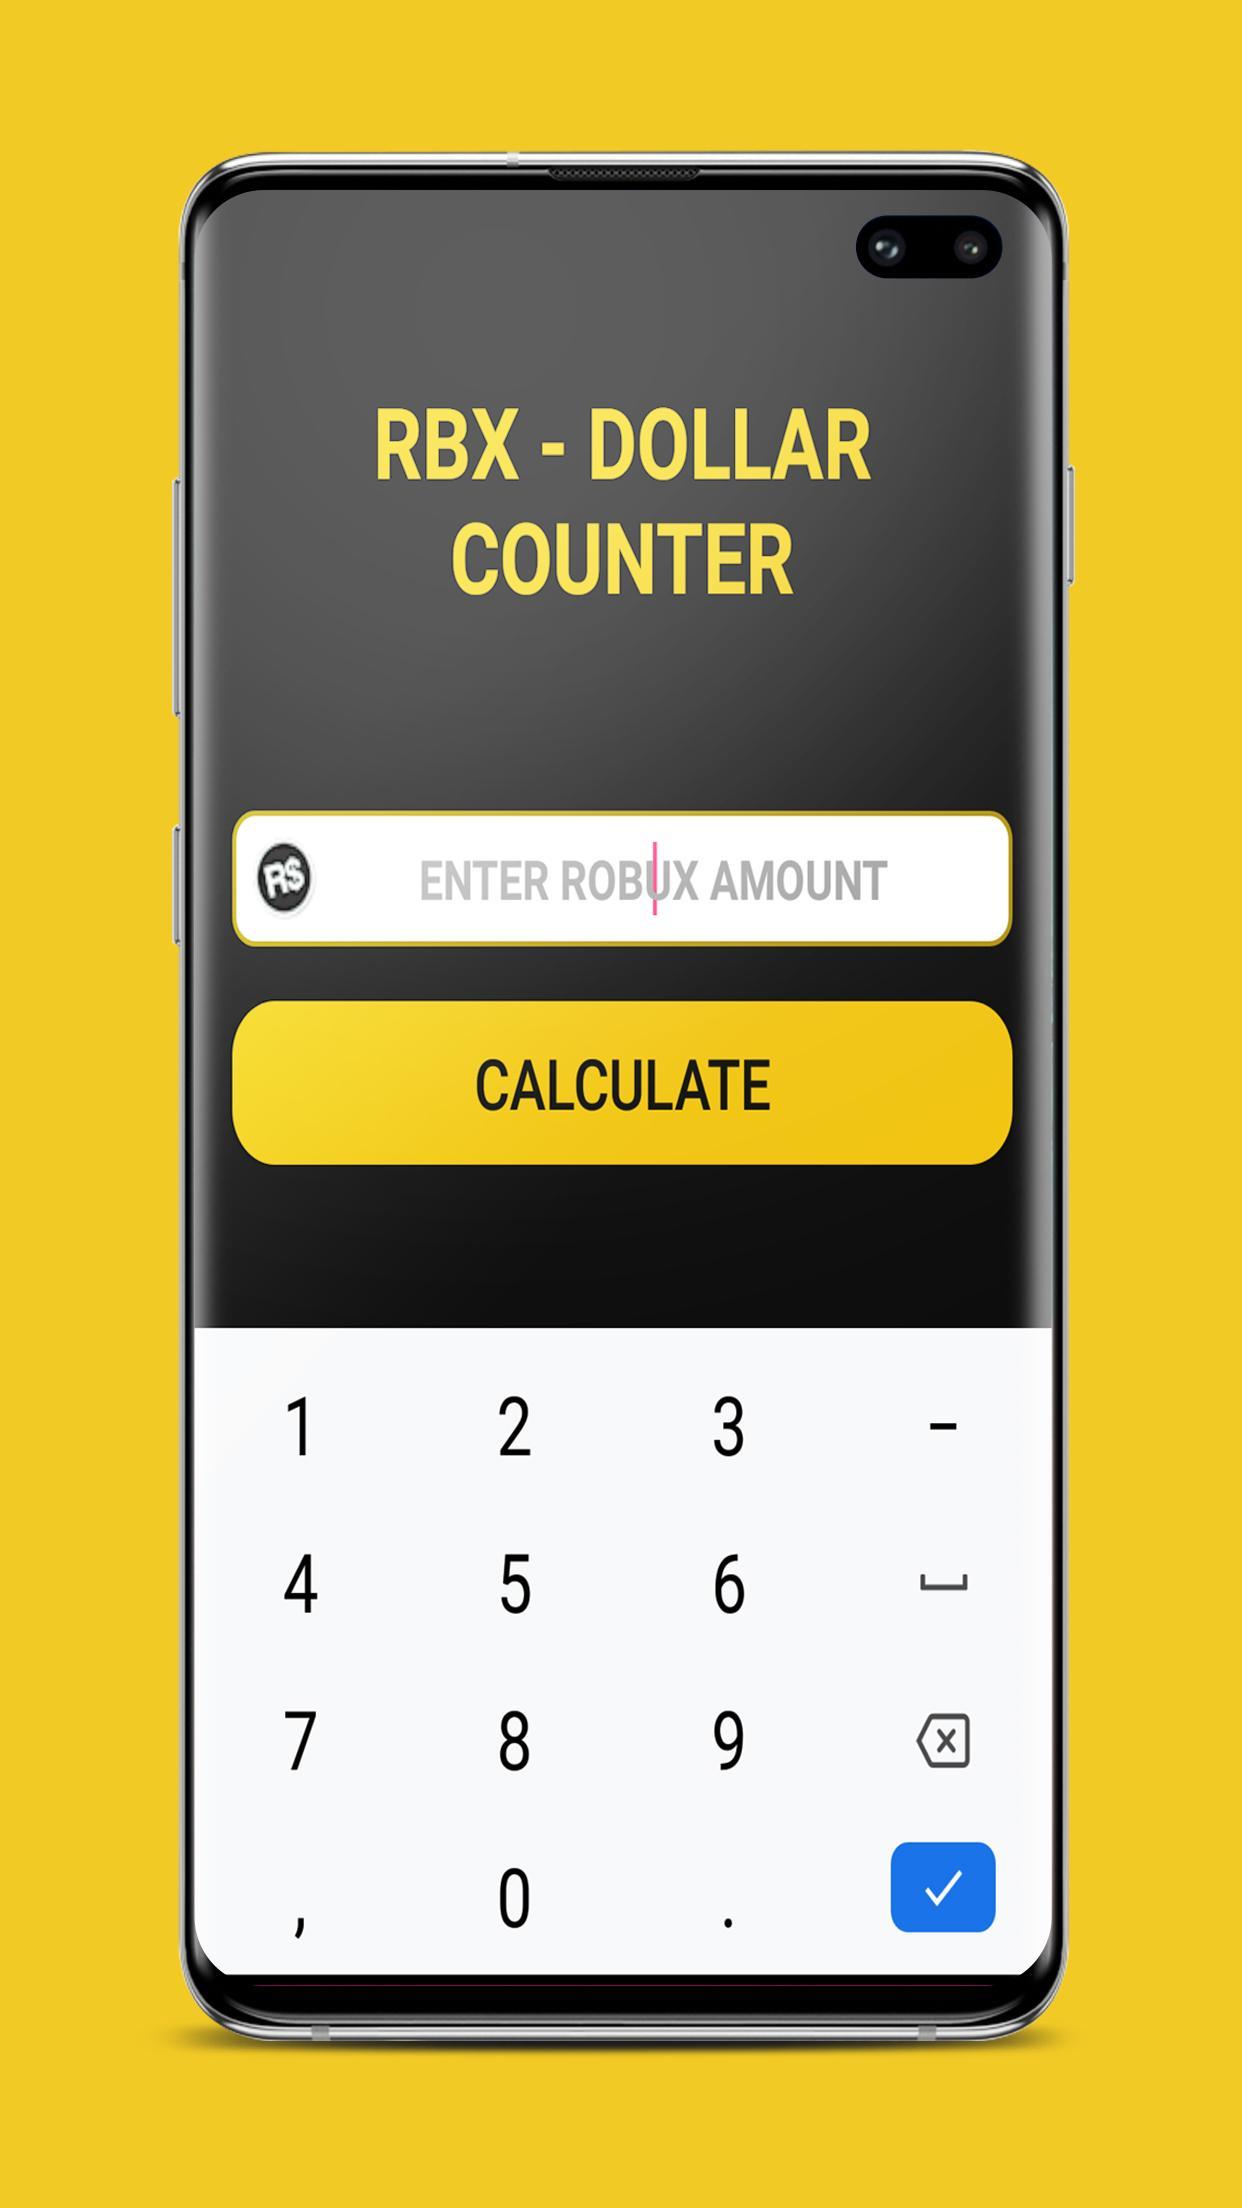 Free Robux Counter Rbx Calculator Conversion Para Android - free robux counter get free robux counter tips app ranking